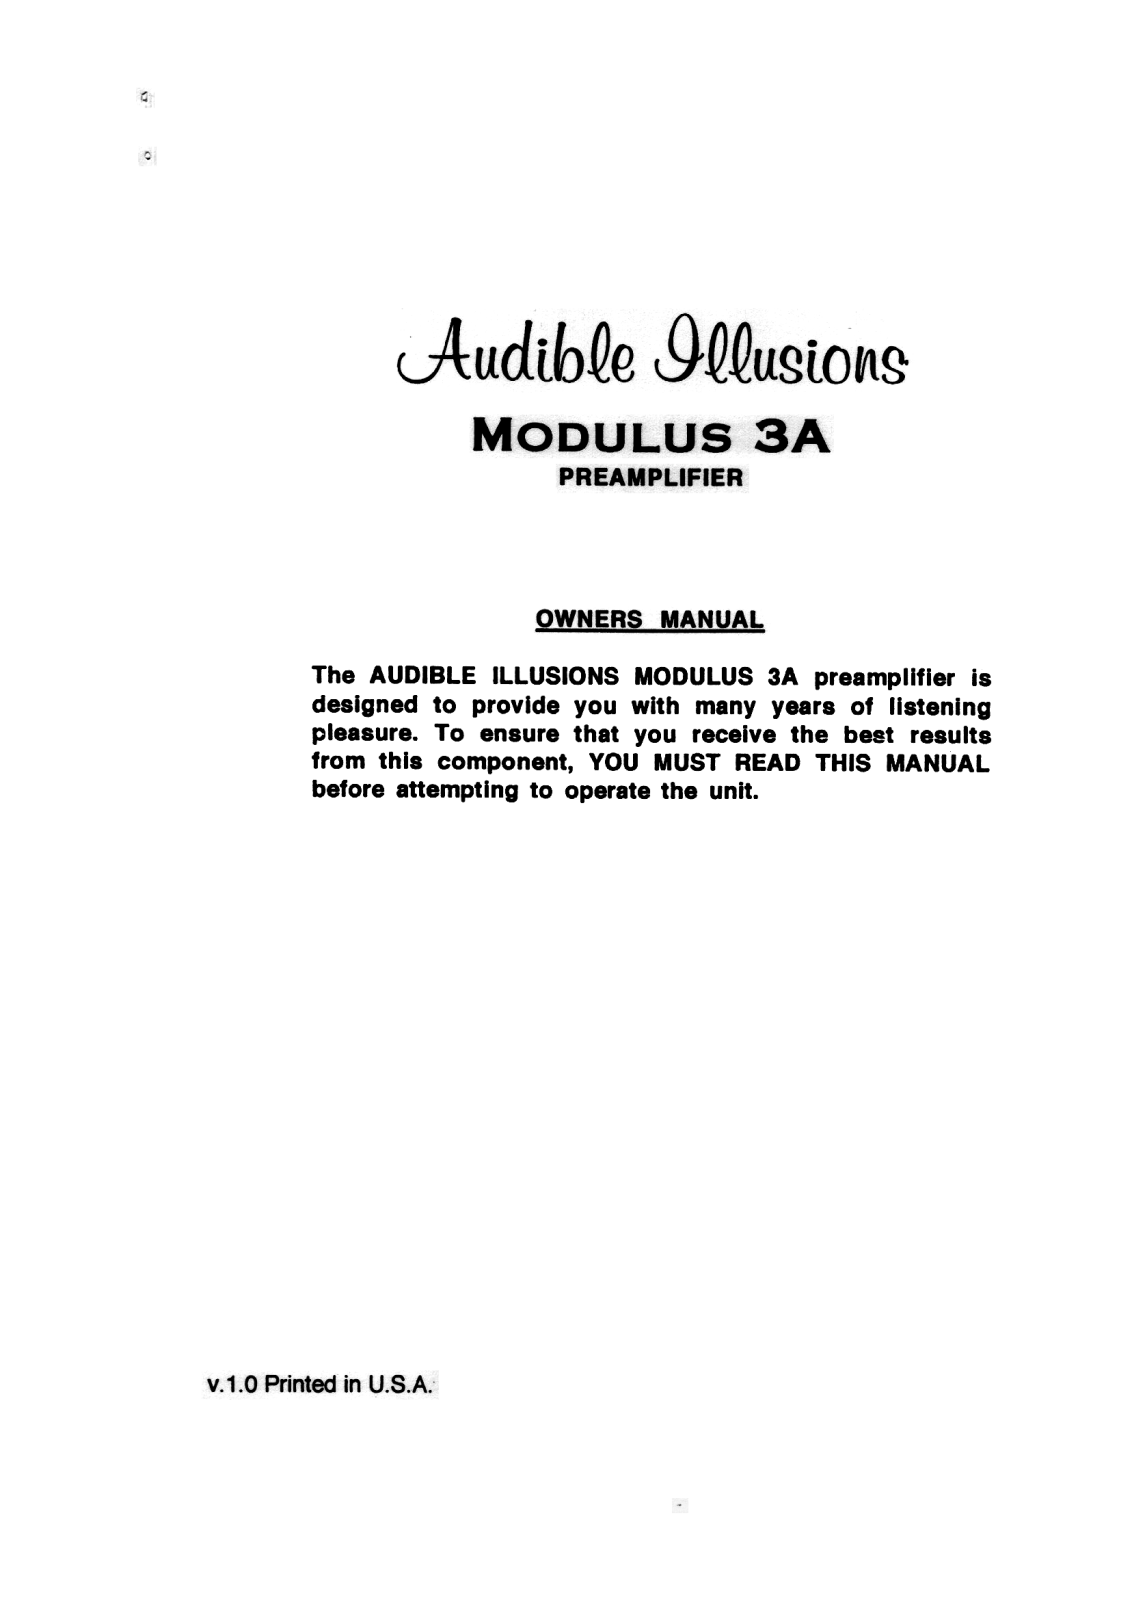 Audible Illusions Modulus 3-A Owners manual